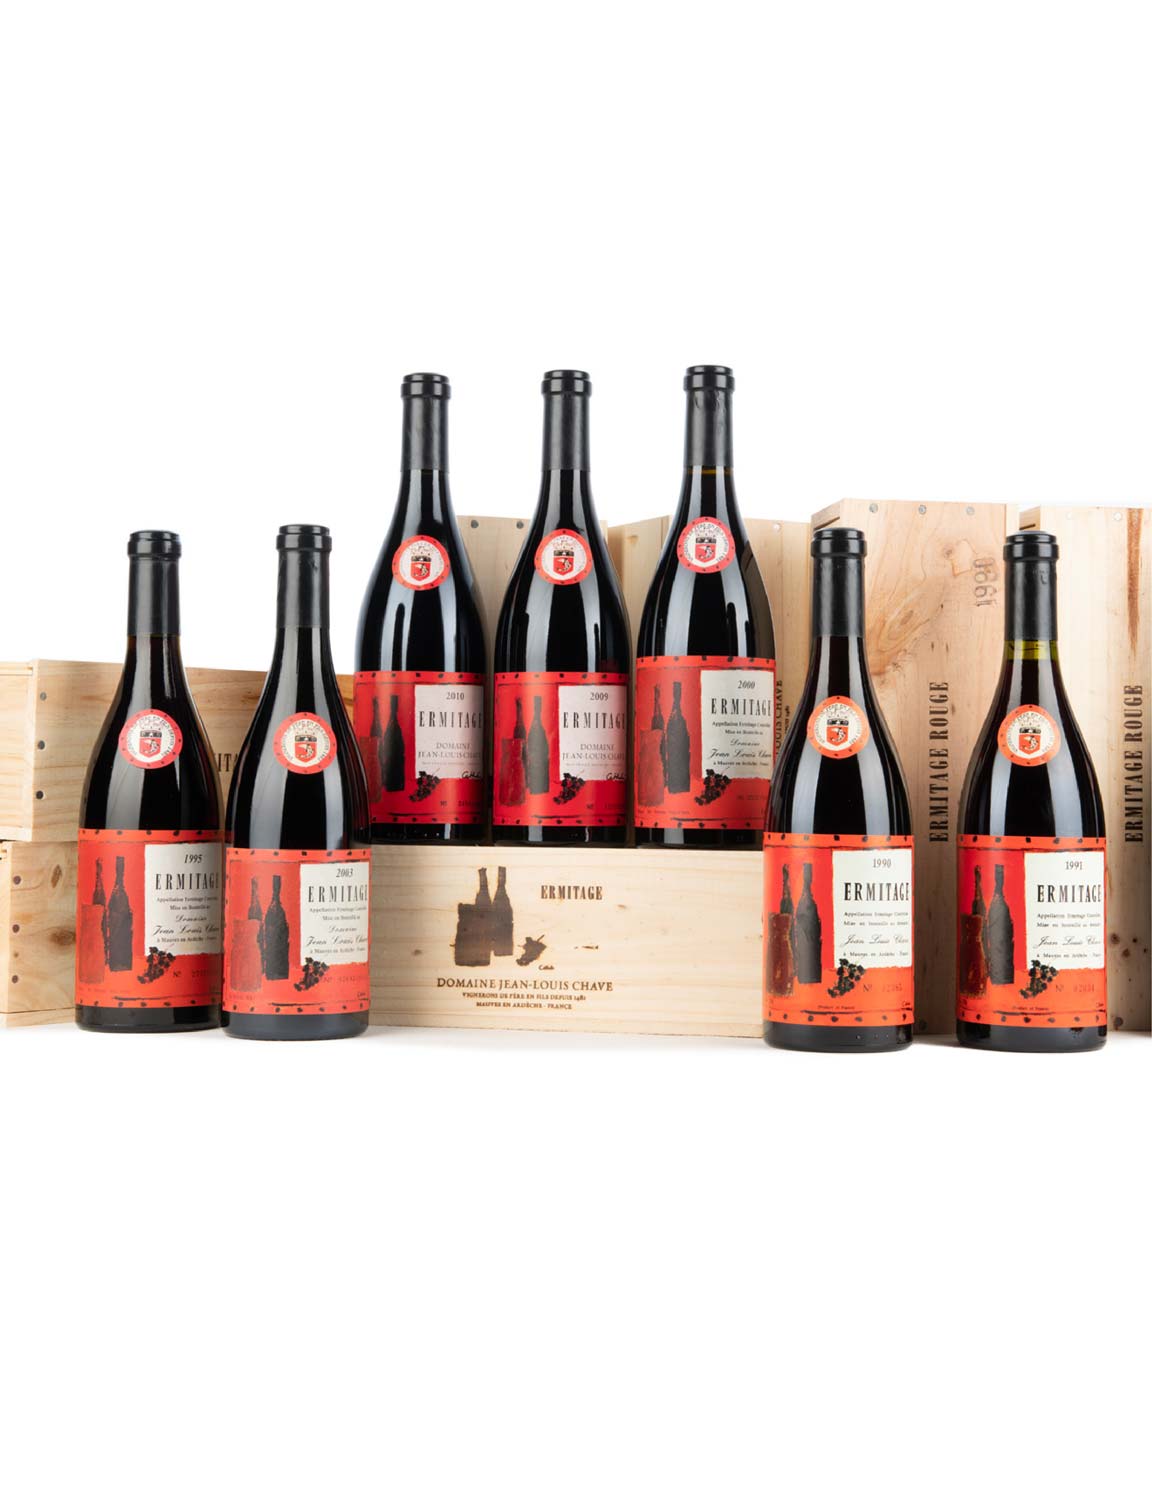 Lot 1192: 8 bottles 1990-2010 J.L. Chave Ermitage cuvée Cathelin in OWC